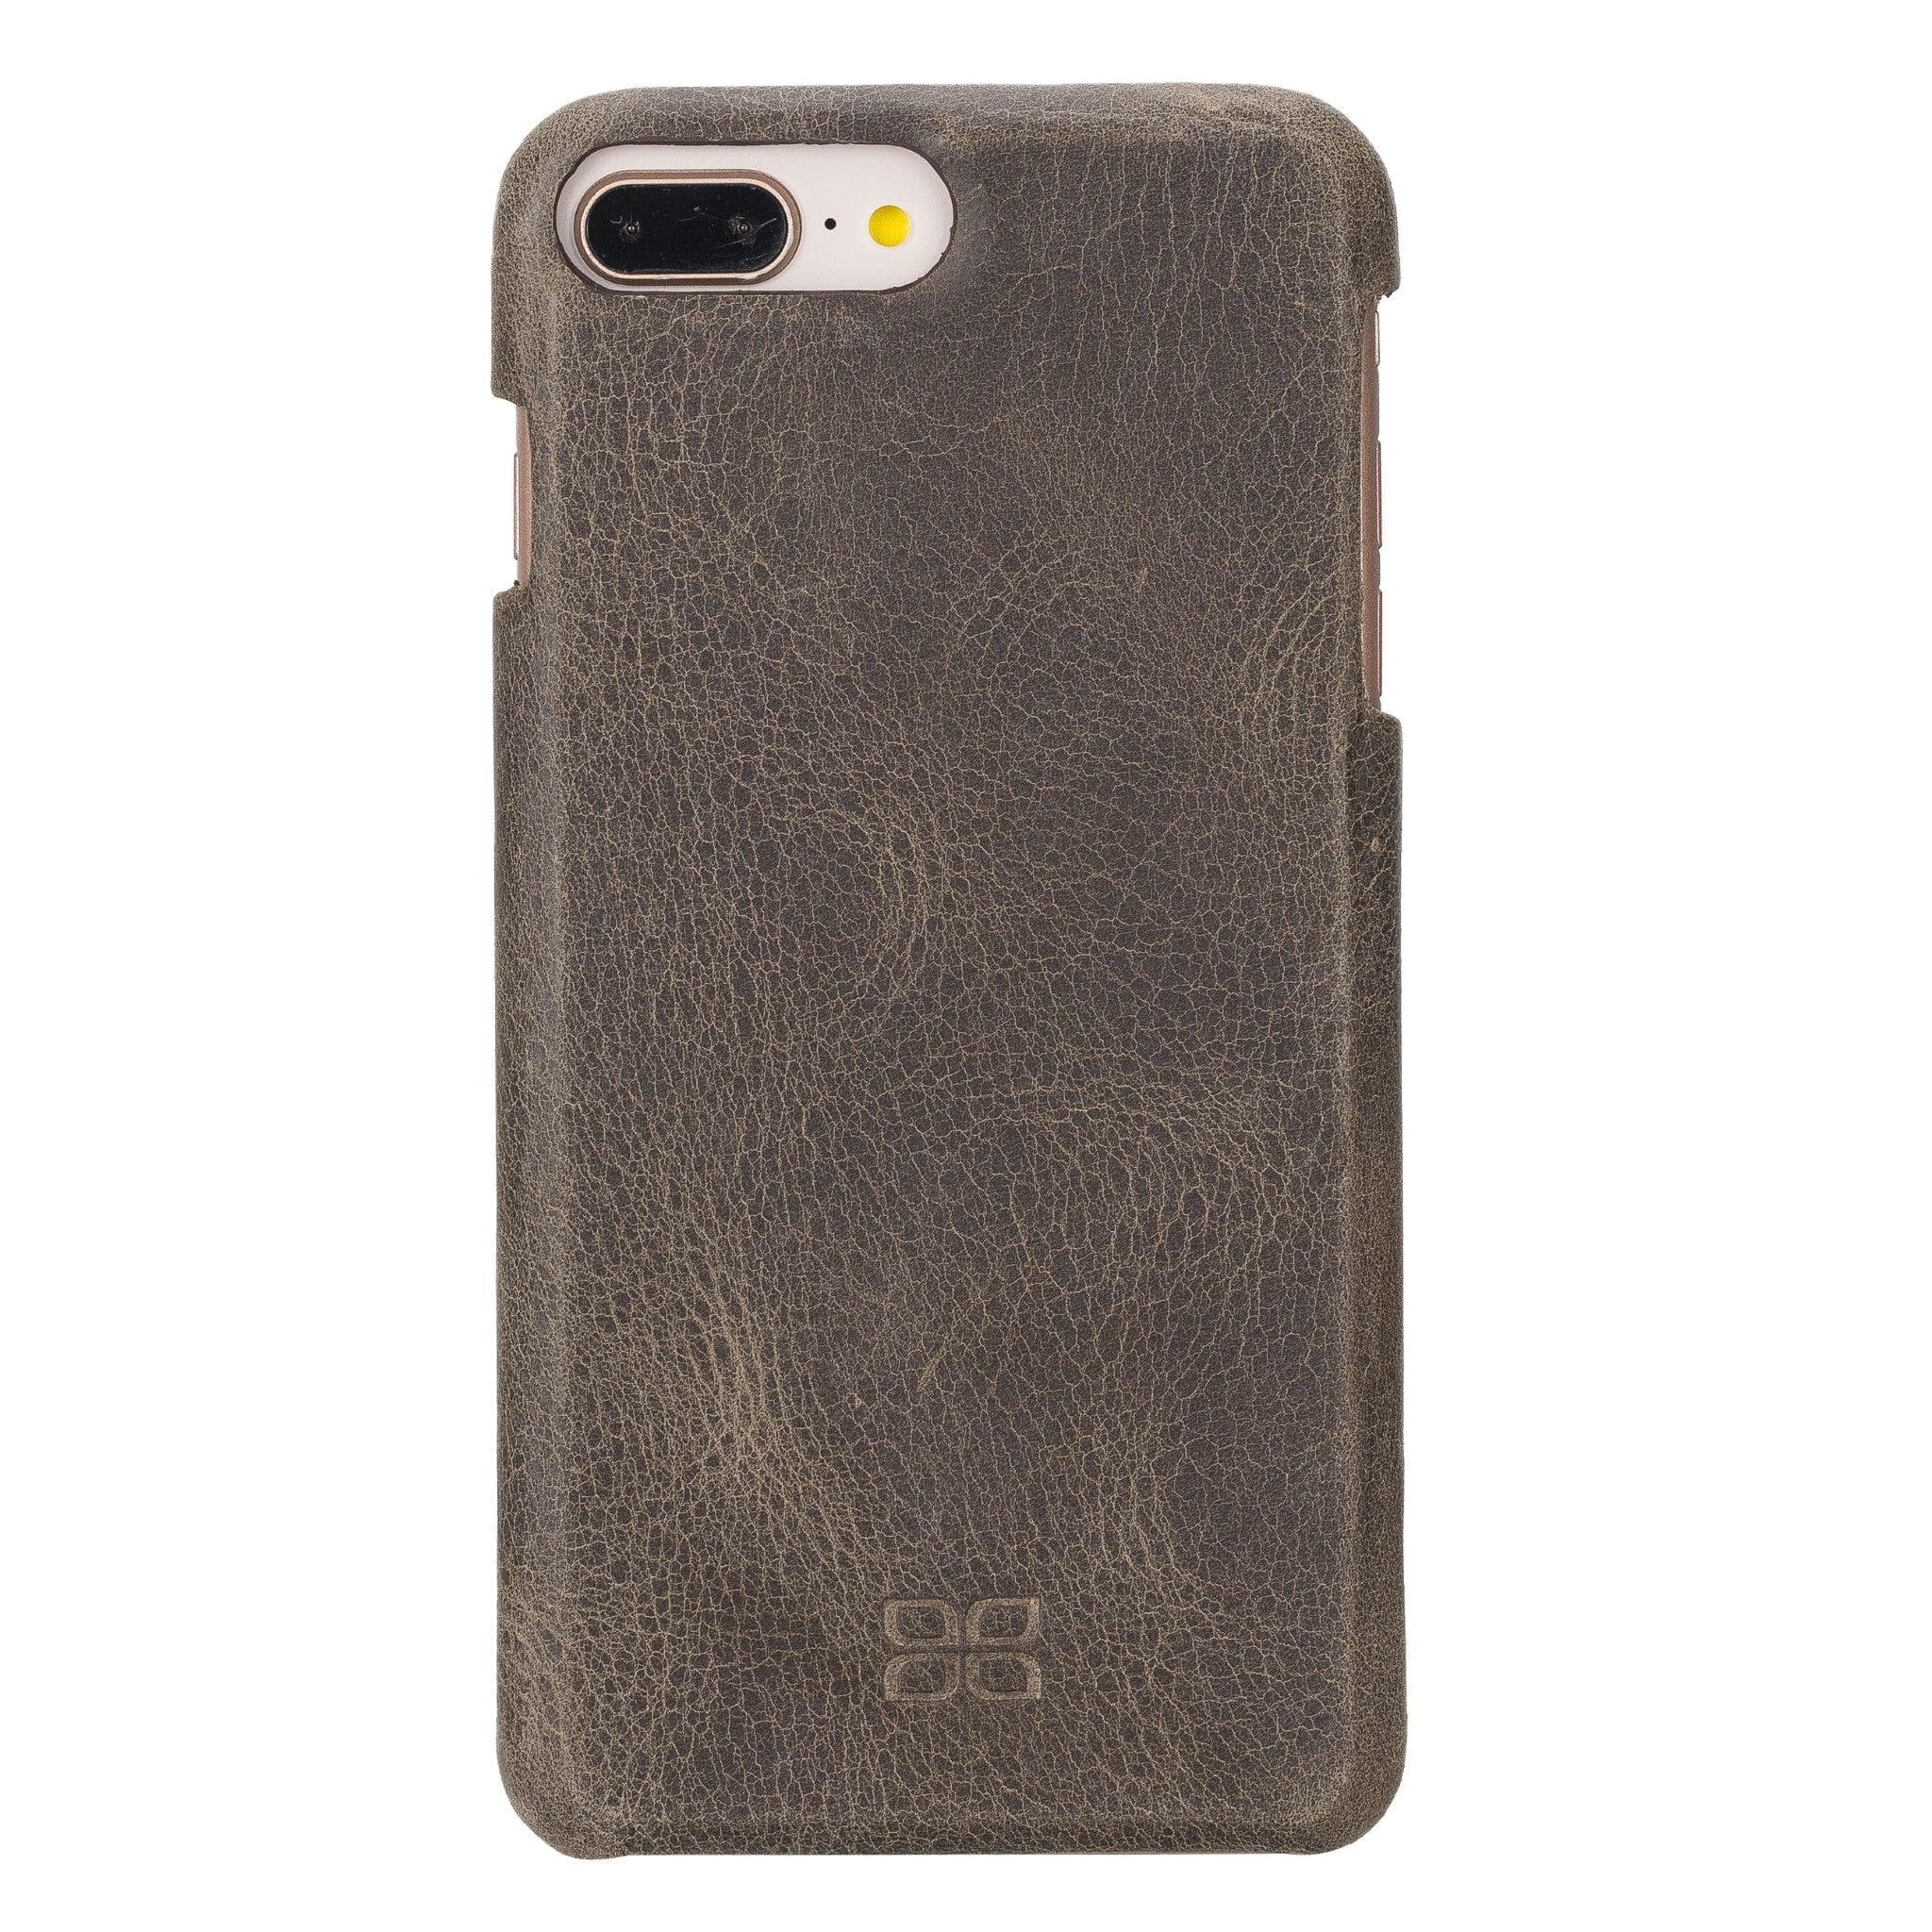 Apple iPhone 8 Series Fully Covering Leather Back Cover Case iPhone 7 / Mat Dark Brown Bouletta LTD